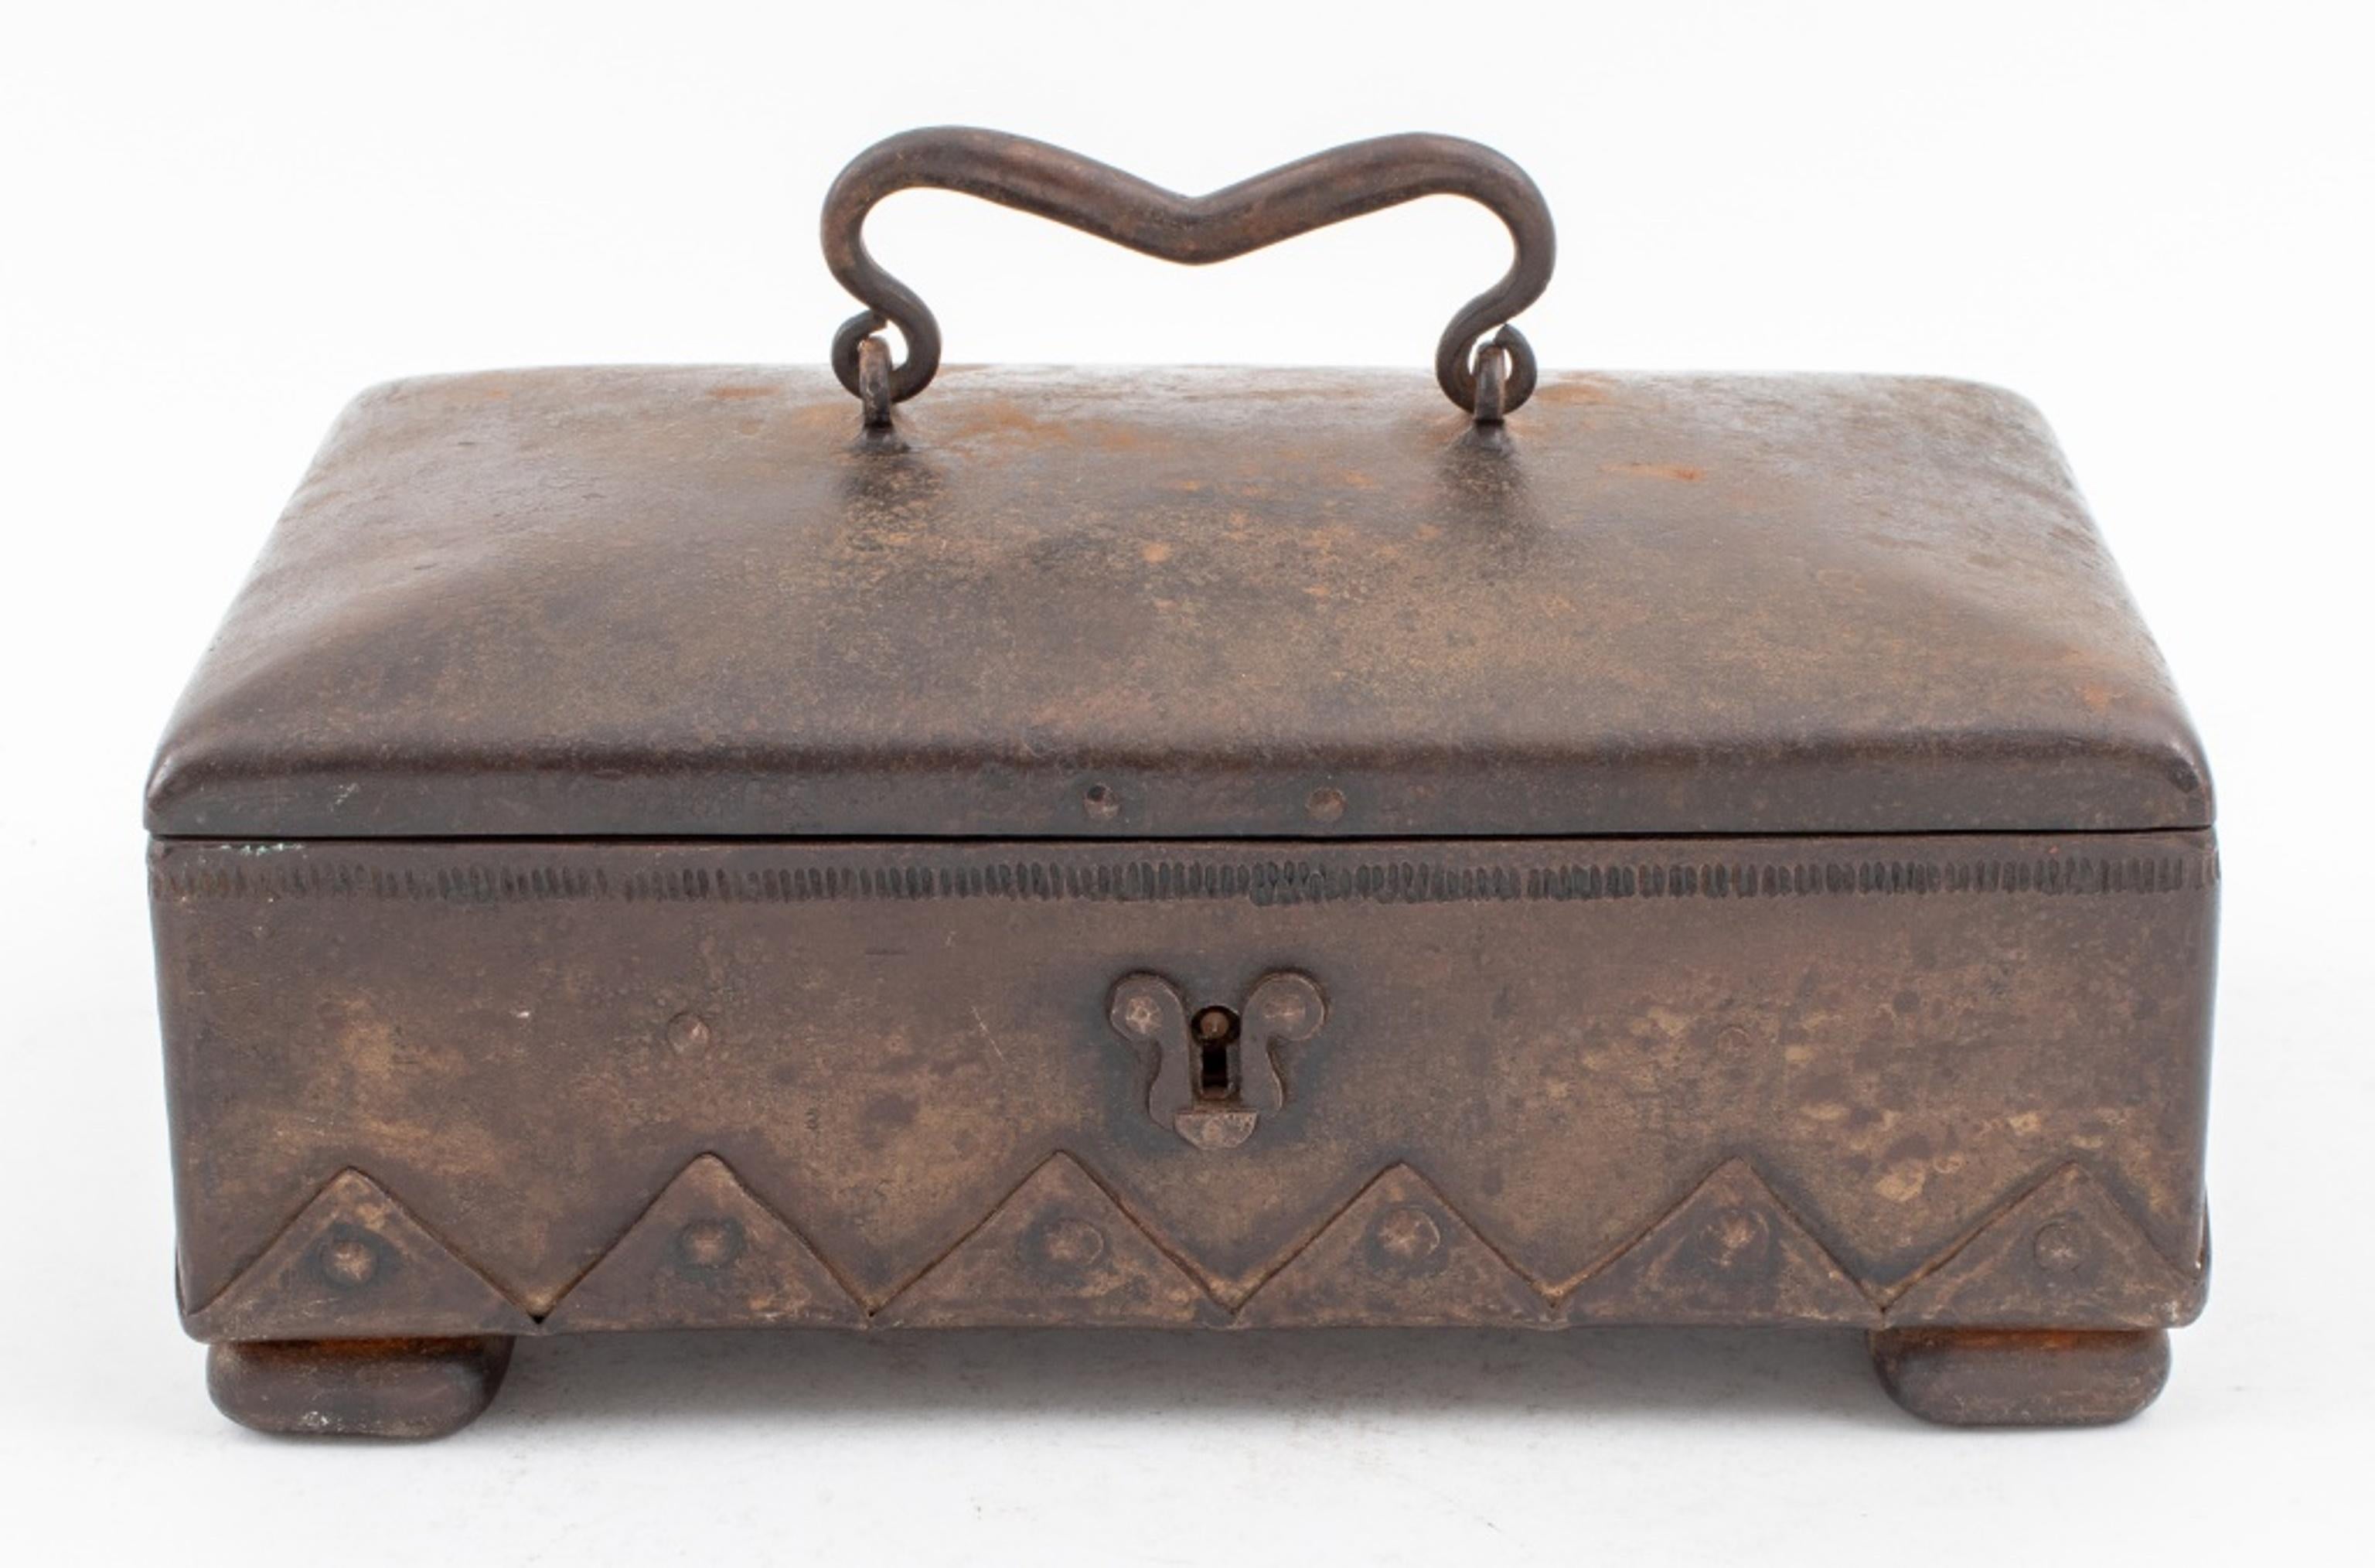 Carl Hubert Wyland (German, 1886-1972) Art Deco period casket coffer in patinated wrought iron with wood lining, makers monogram on the bottom, circa 1925. Note: An identical piece by Wyland sold at Sotheby's in 2007 at $8,750. In very good vintage